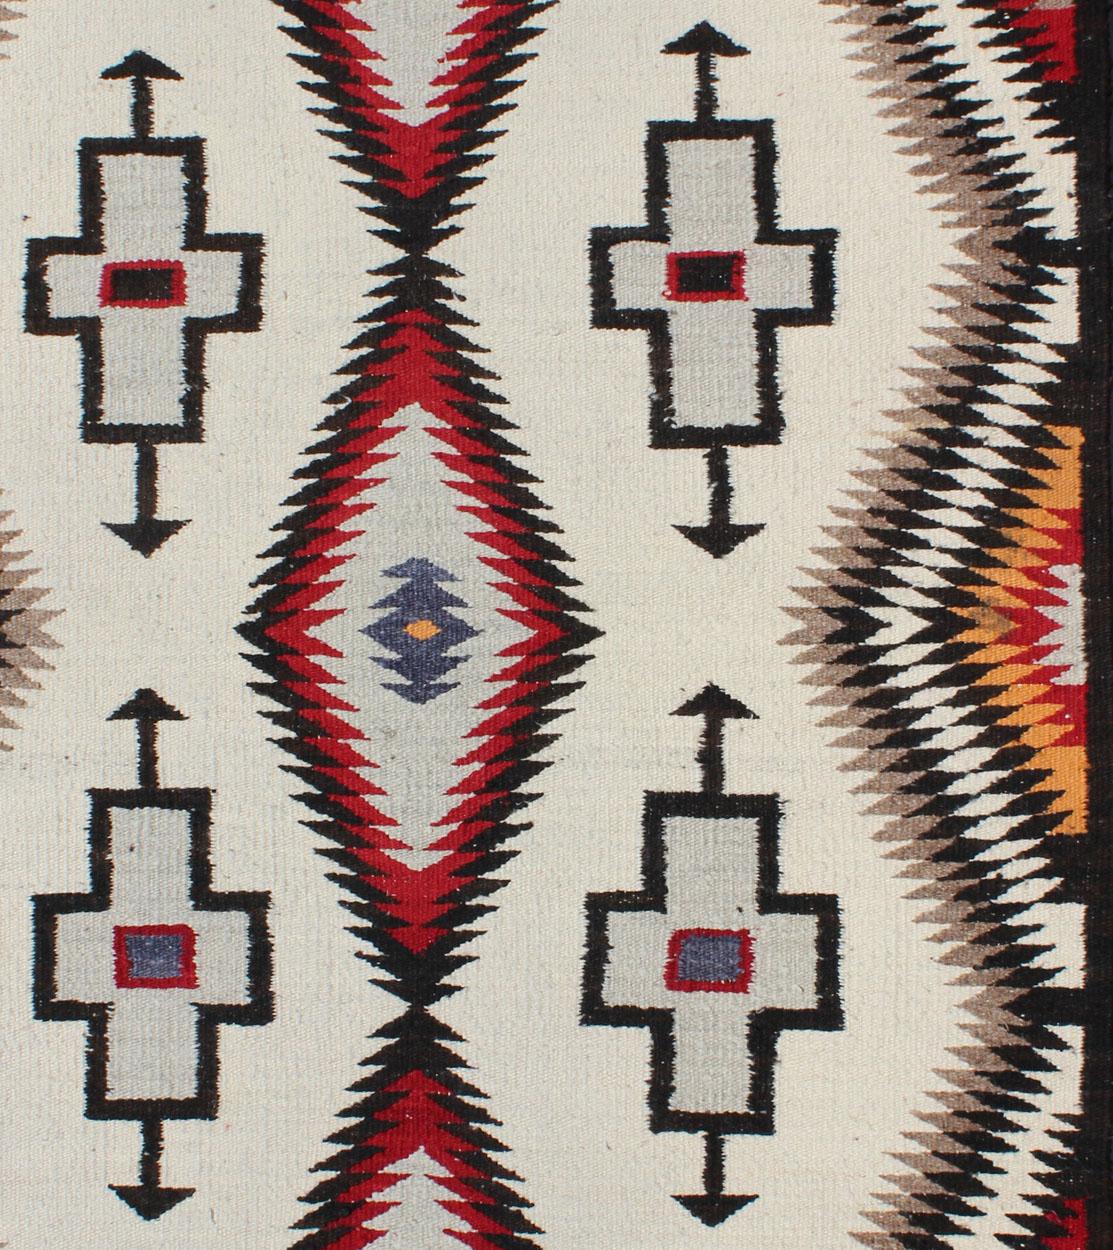 This Southwestern Navajo rug features designs and coloring most consistent with textiles that originated at the Ganado Trading Post. It's woven of native, hand-spun wool in natural colors of grey, brown, ivory, orange, black and aniline